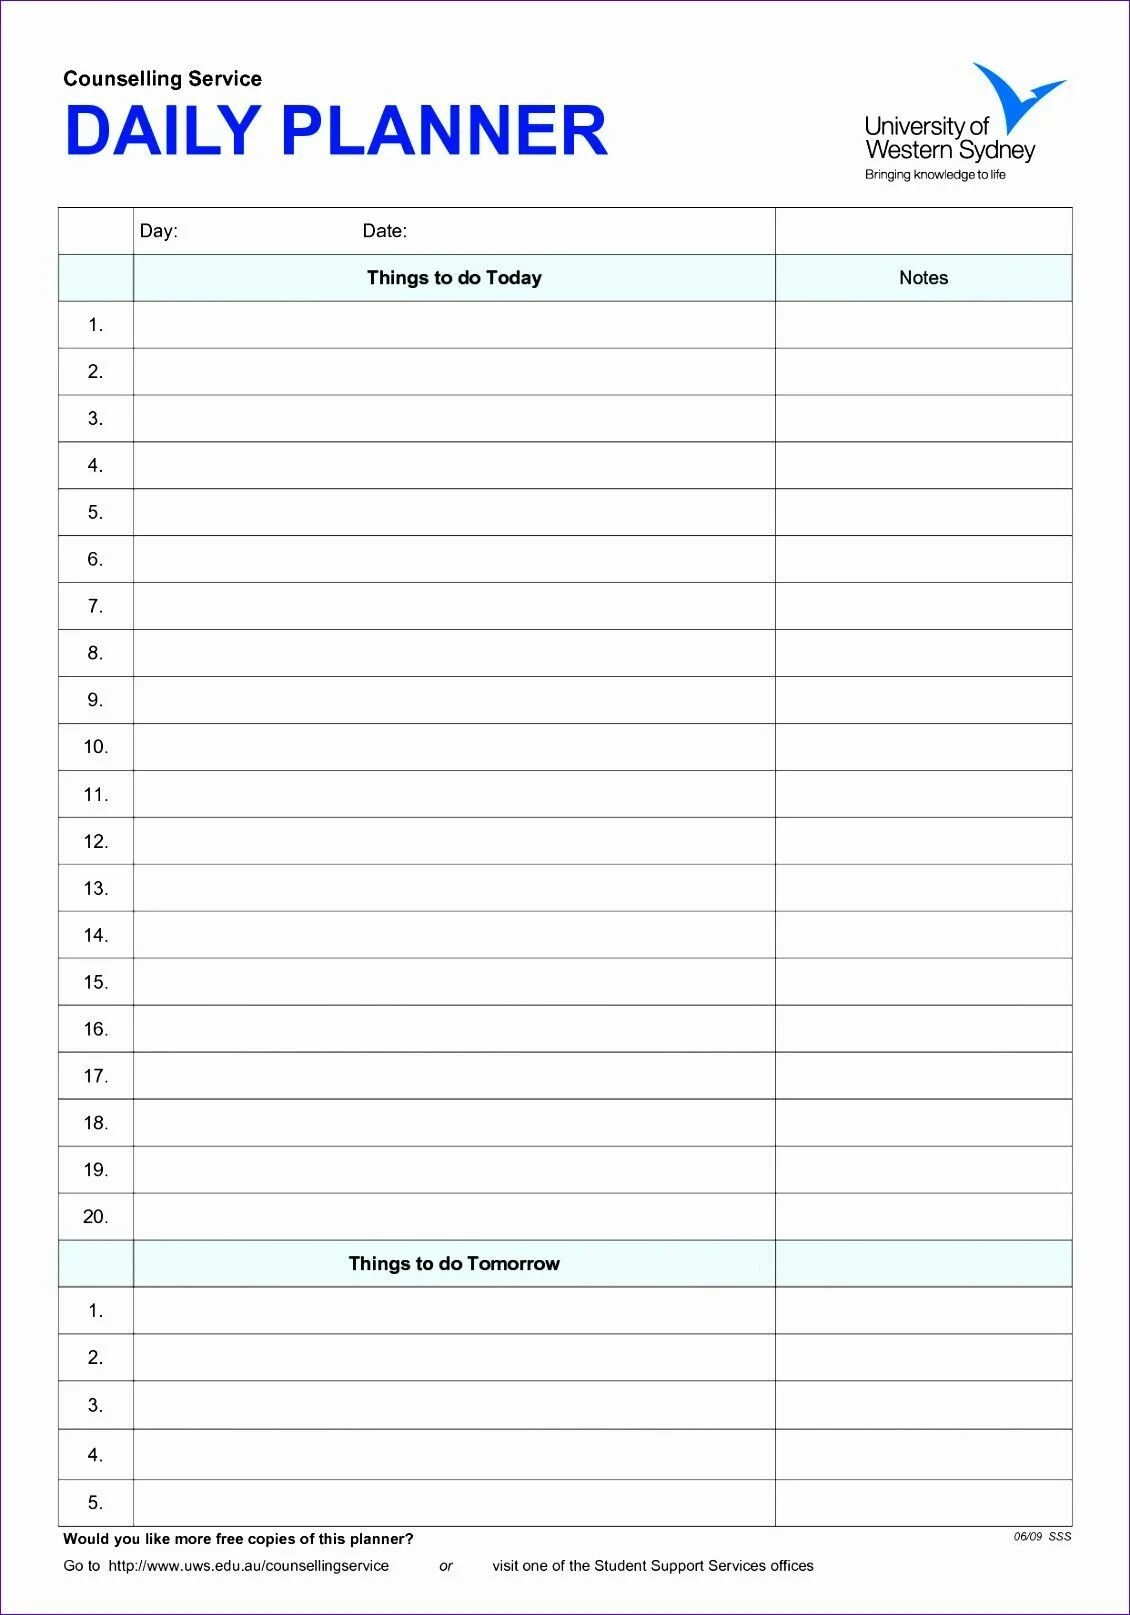 Daily Planner. Day Planner Template. Daily Planner для печати. Daily Planner шаблон.